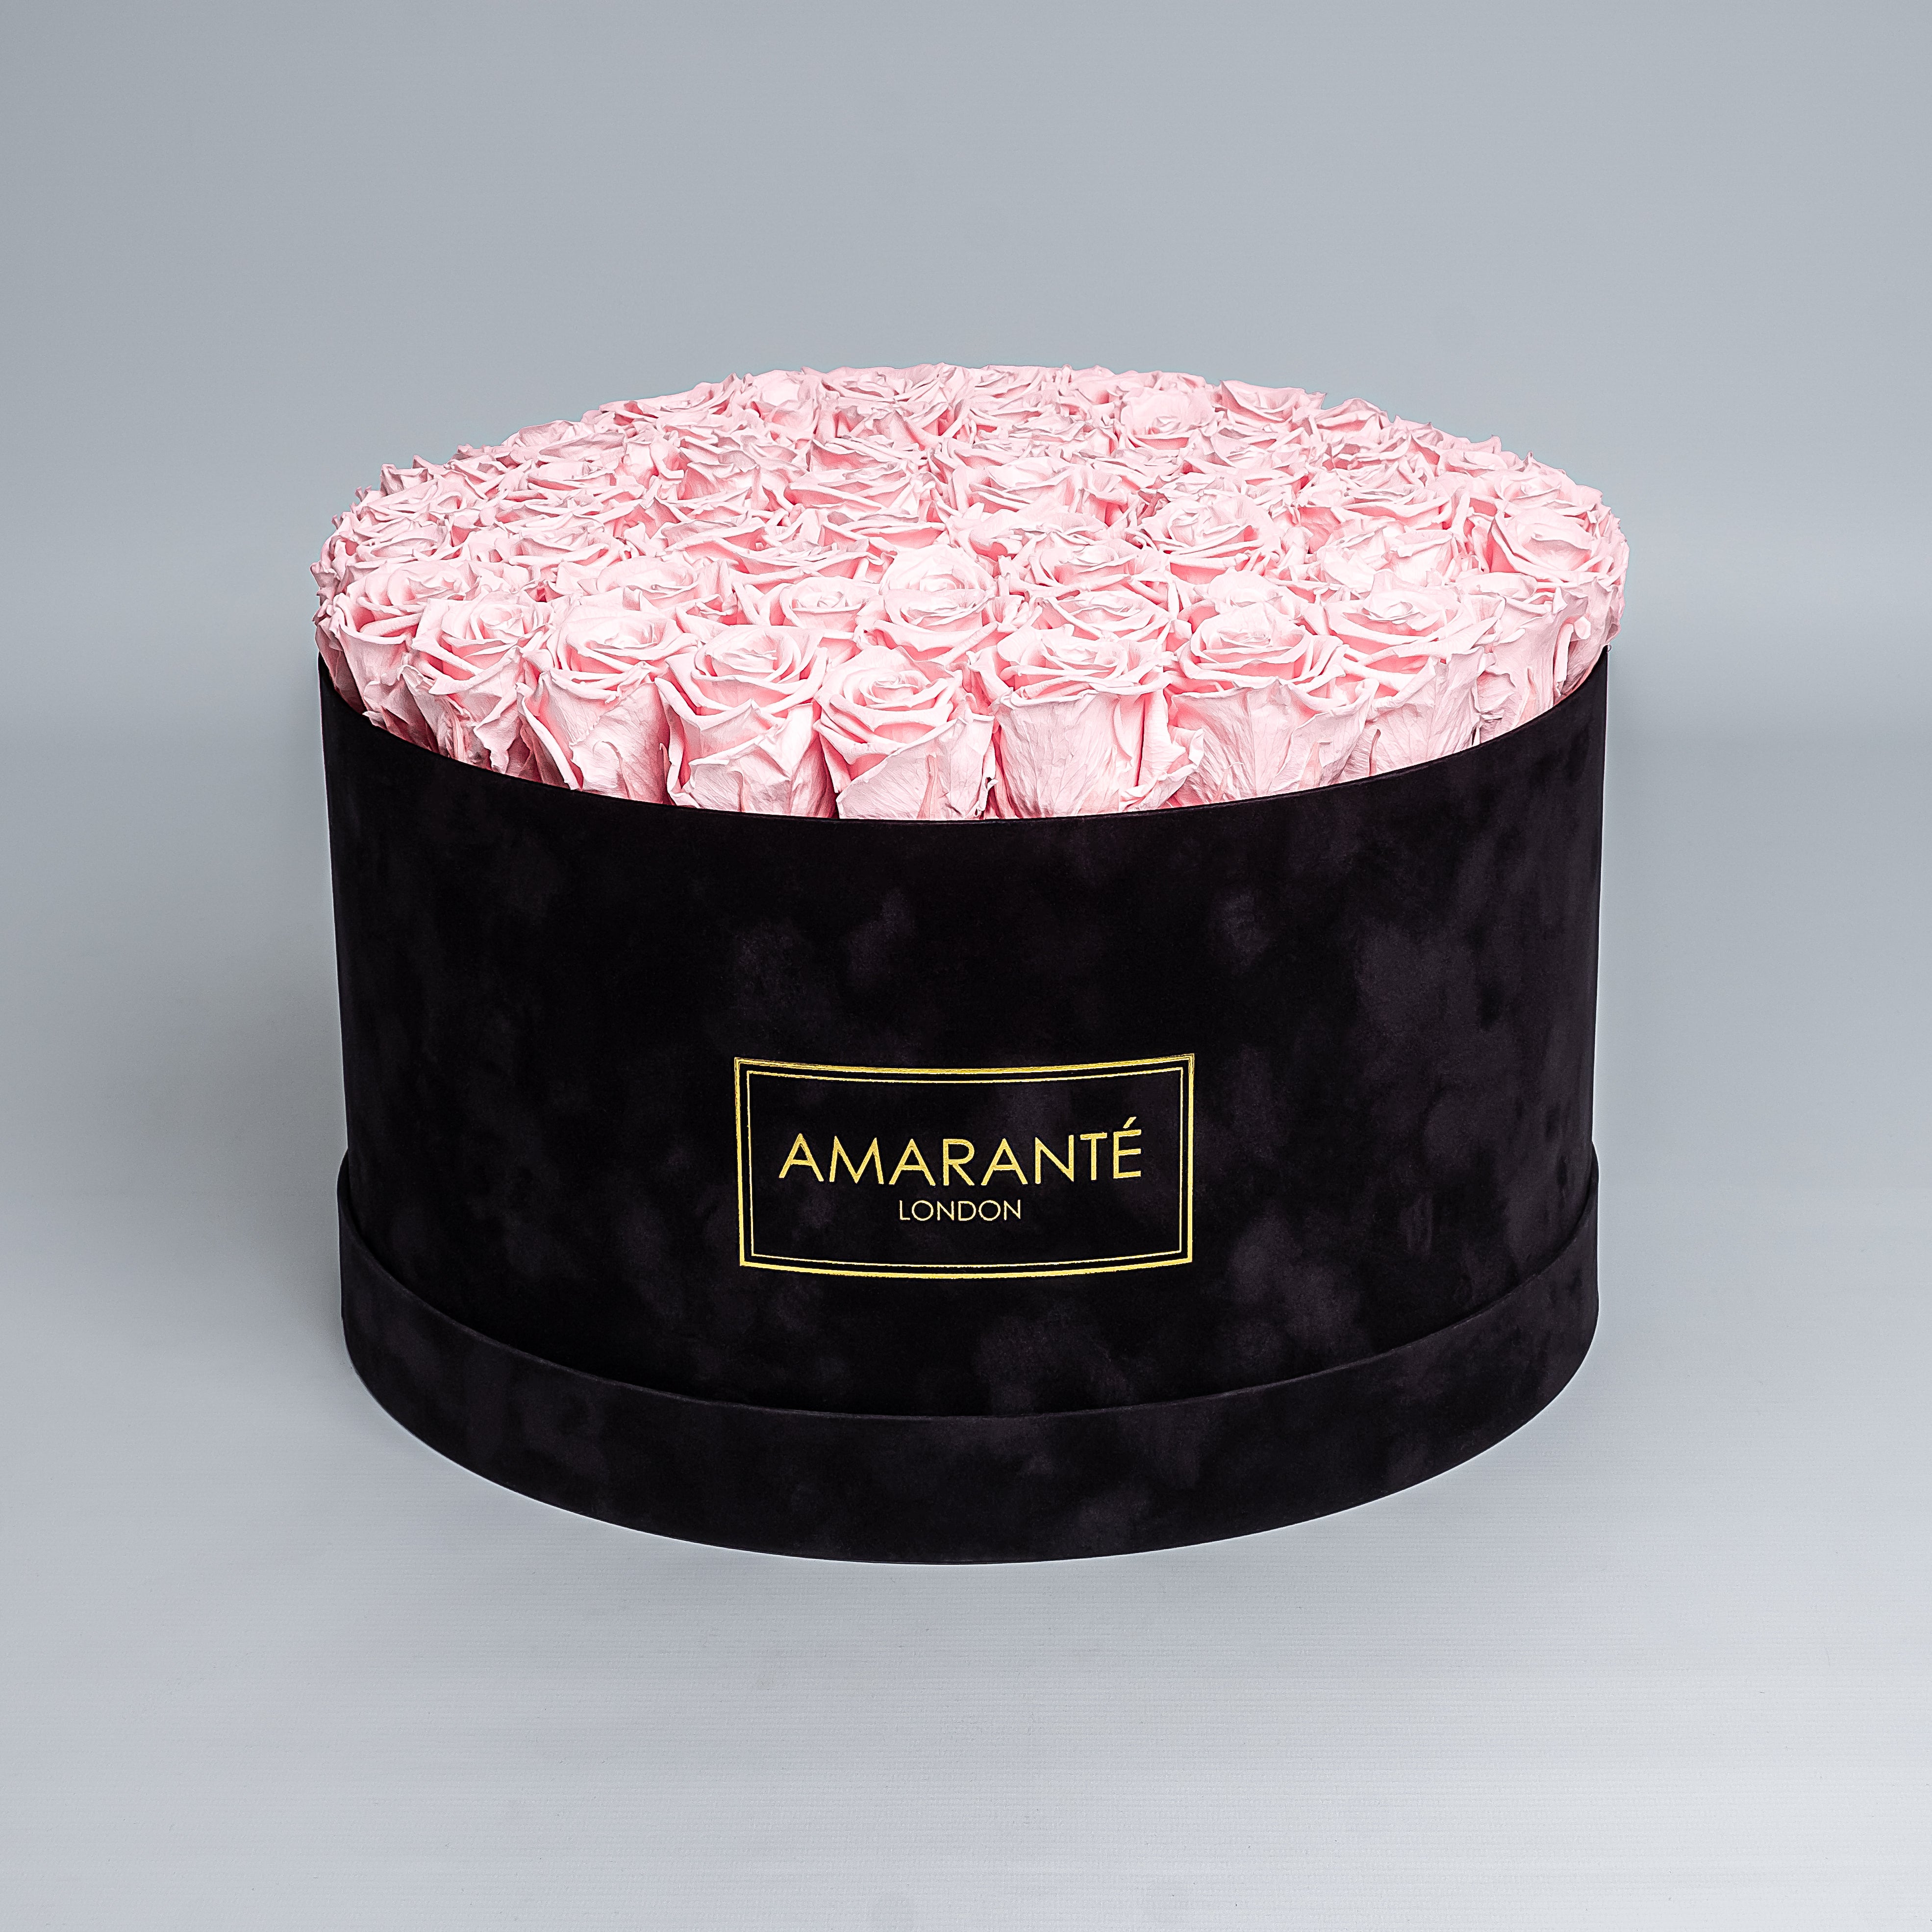 70 Exquisite light pink infinity roses elegantly arranged in a stylish black deluxe suede round rose box. Perfect for expressing timeless love and affection to family, friends and loved ones. Available for free UK delivery.